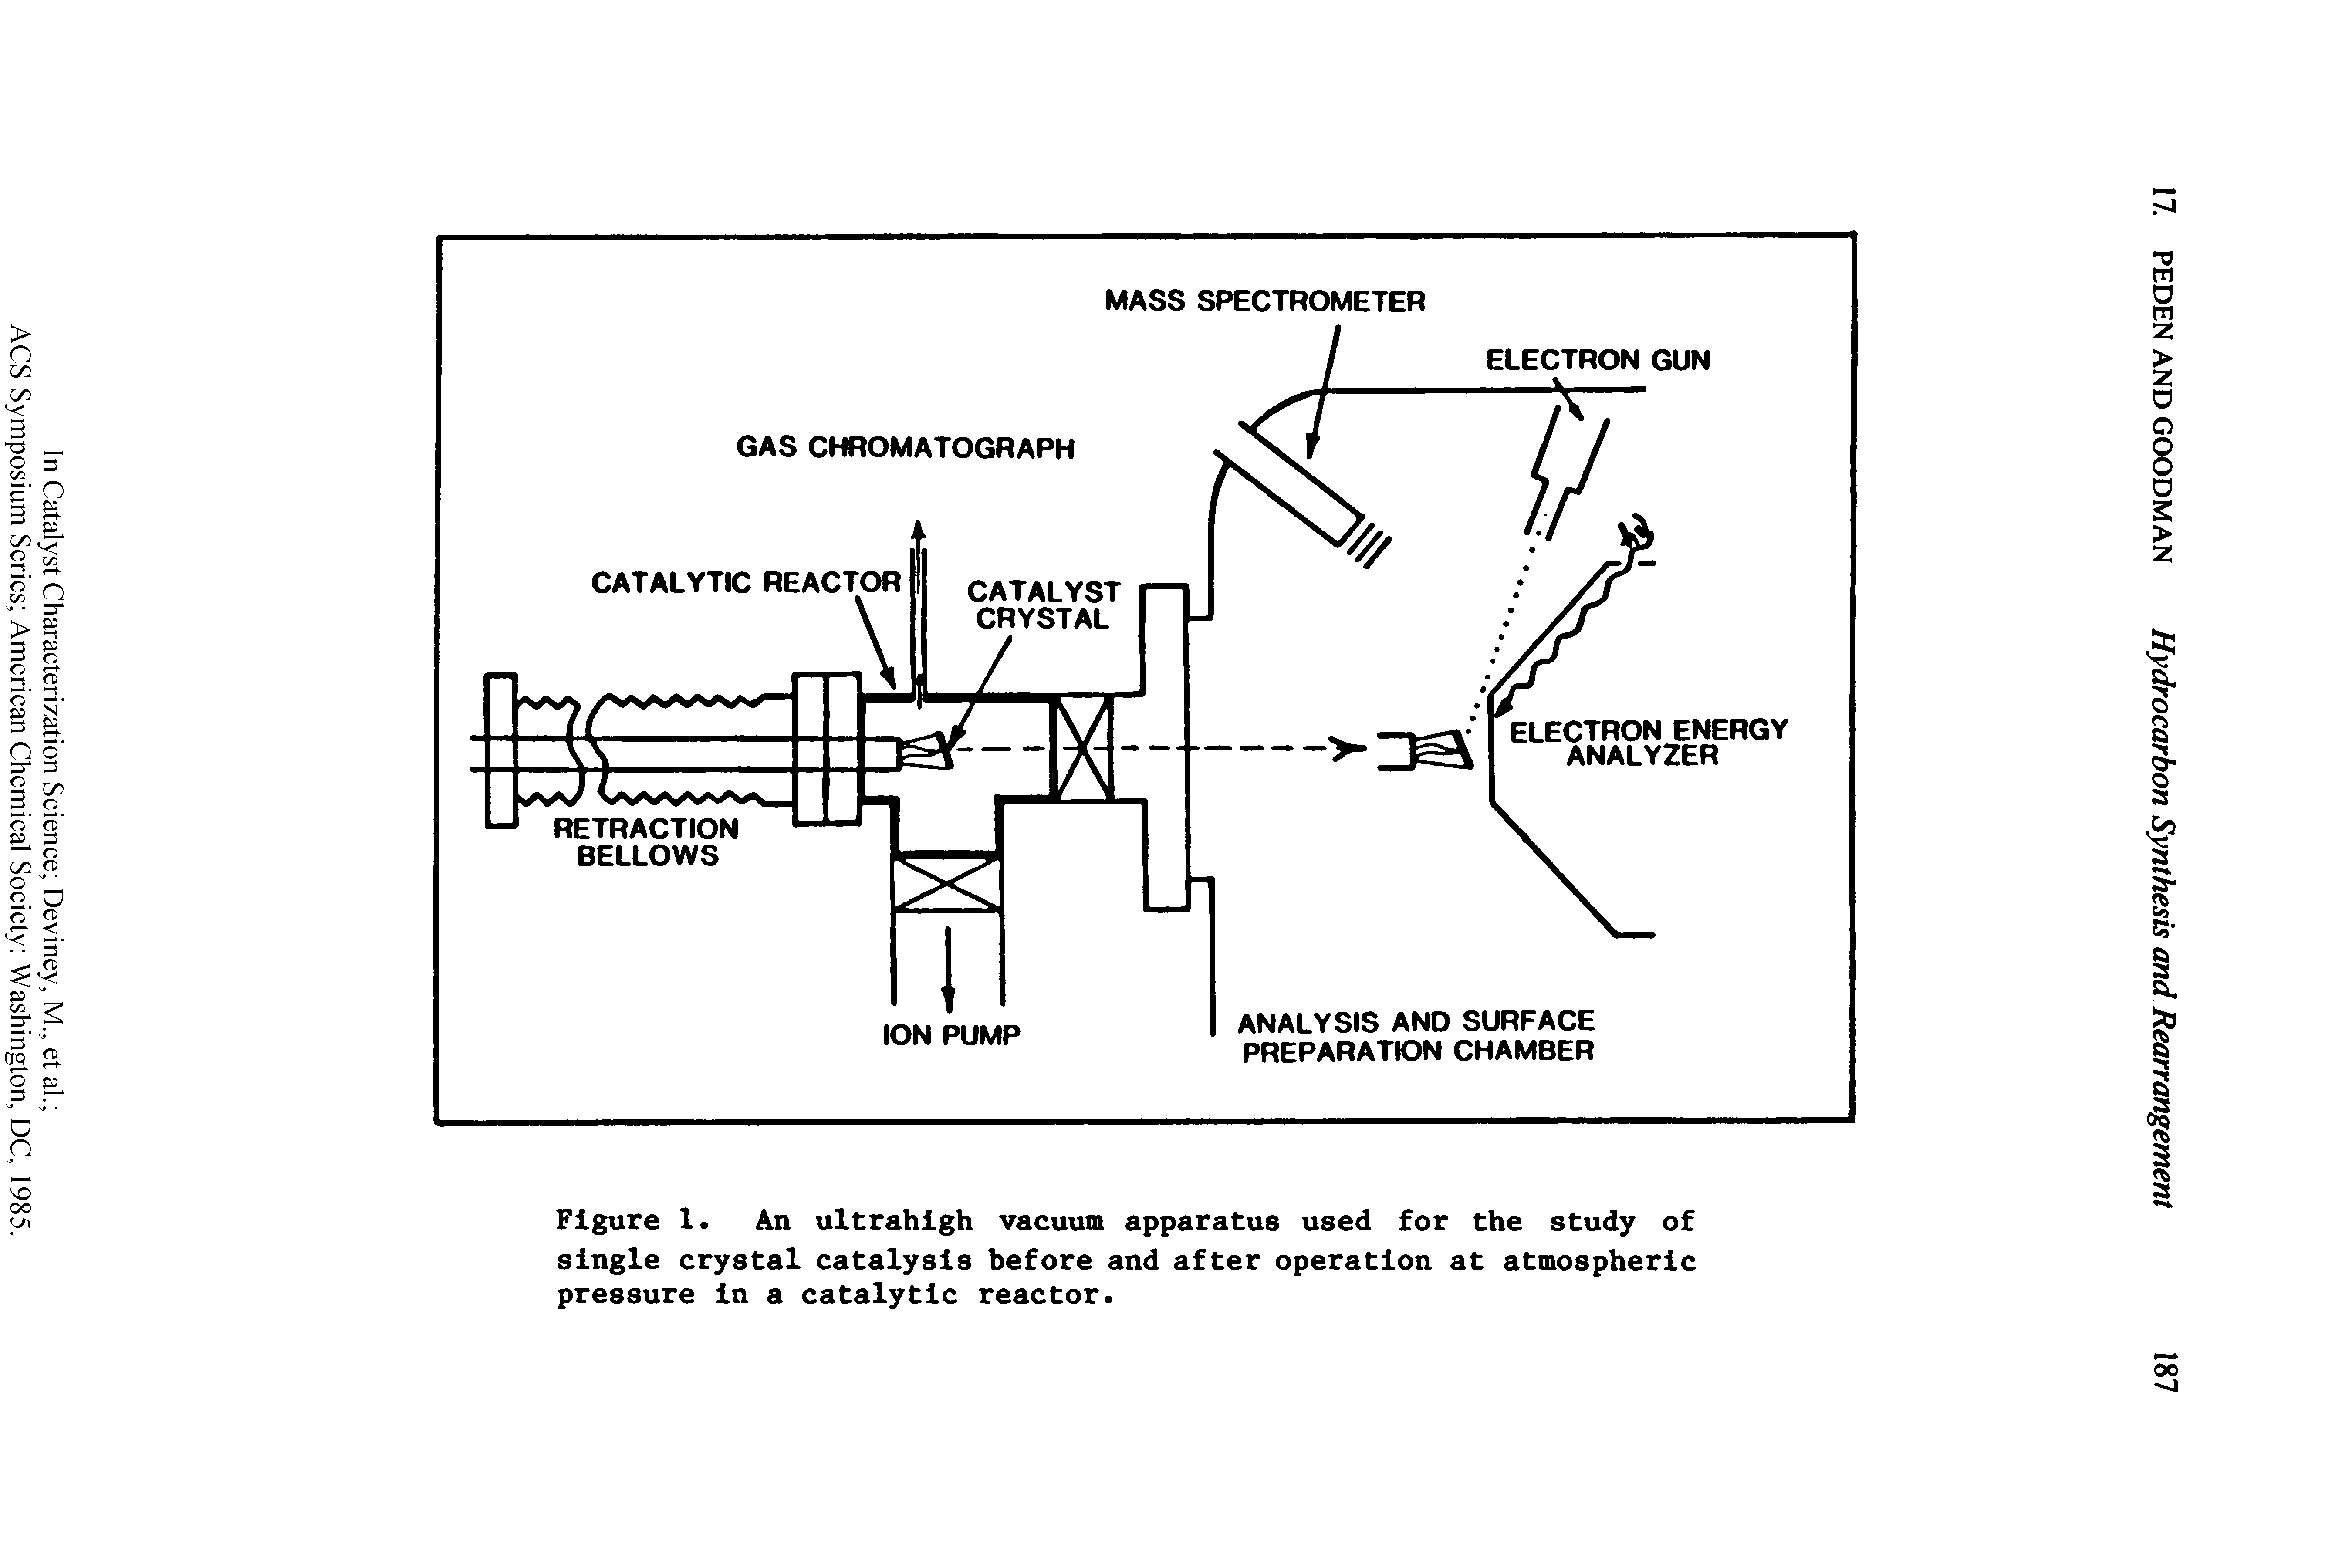 Figure 1. An ultrahigh vacuum apparatus used for the study of single crystal catalysis before and after operation at atmospheric pressure in a catalytic reactor.